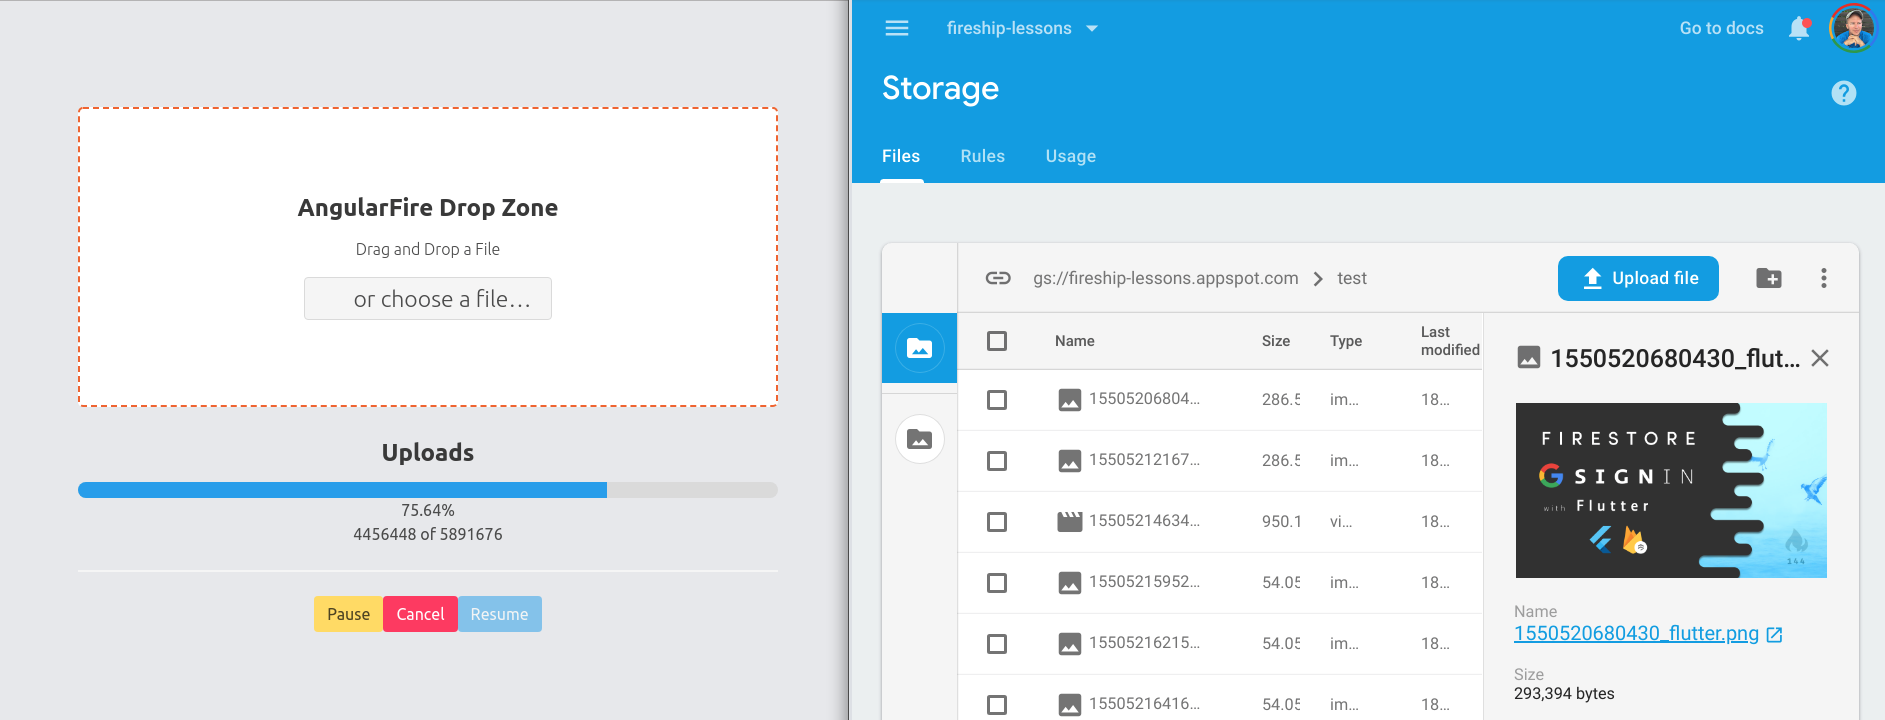 Firebase storage demo with multiple files